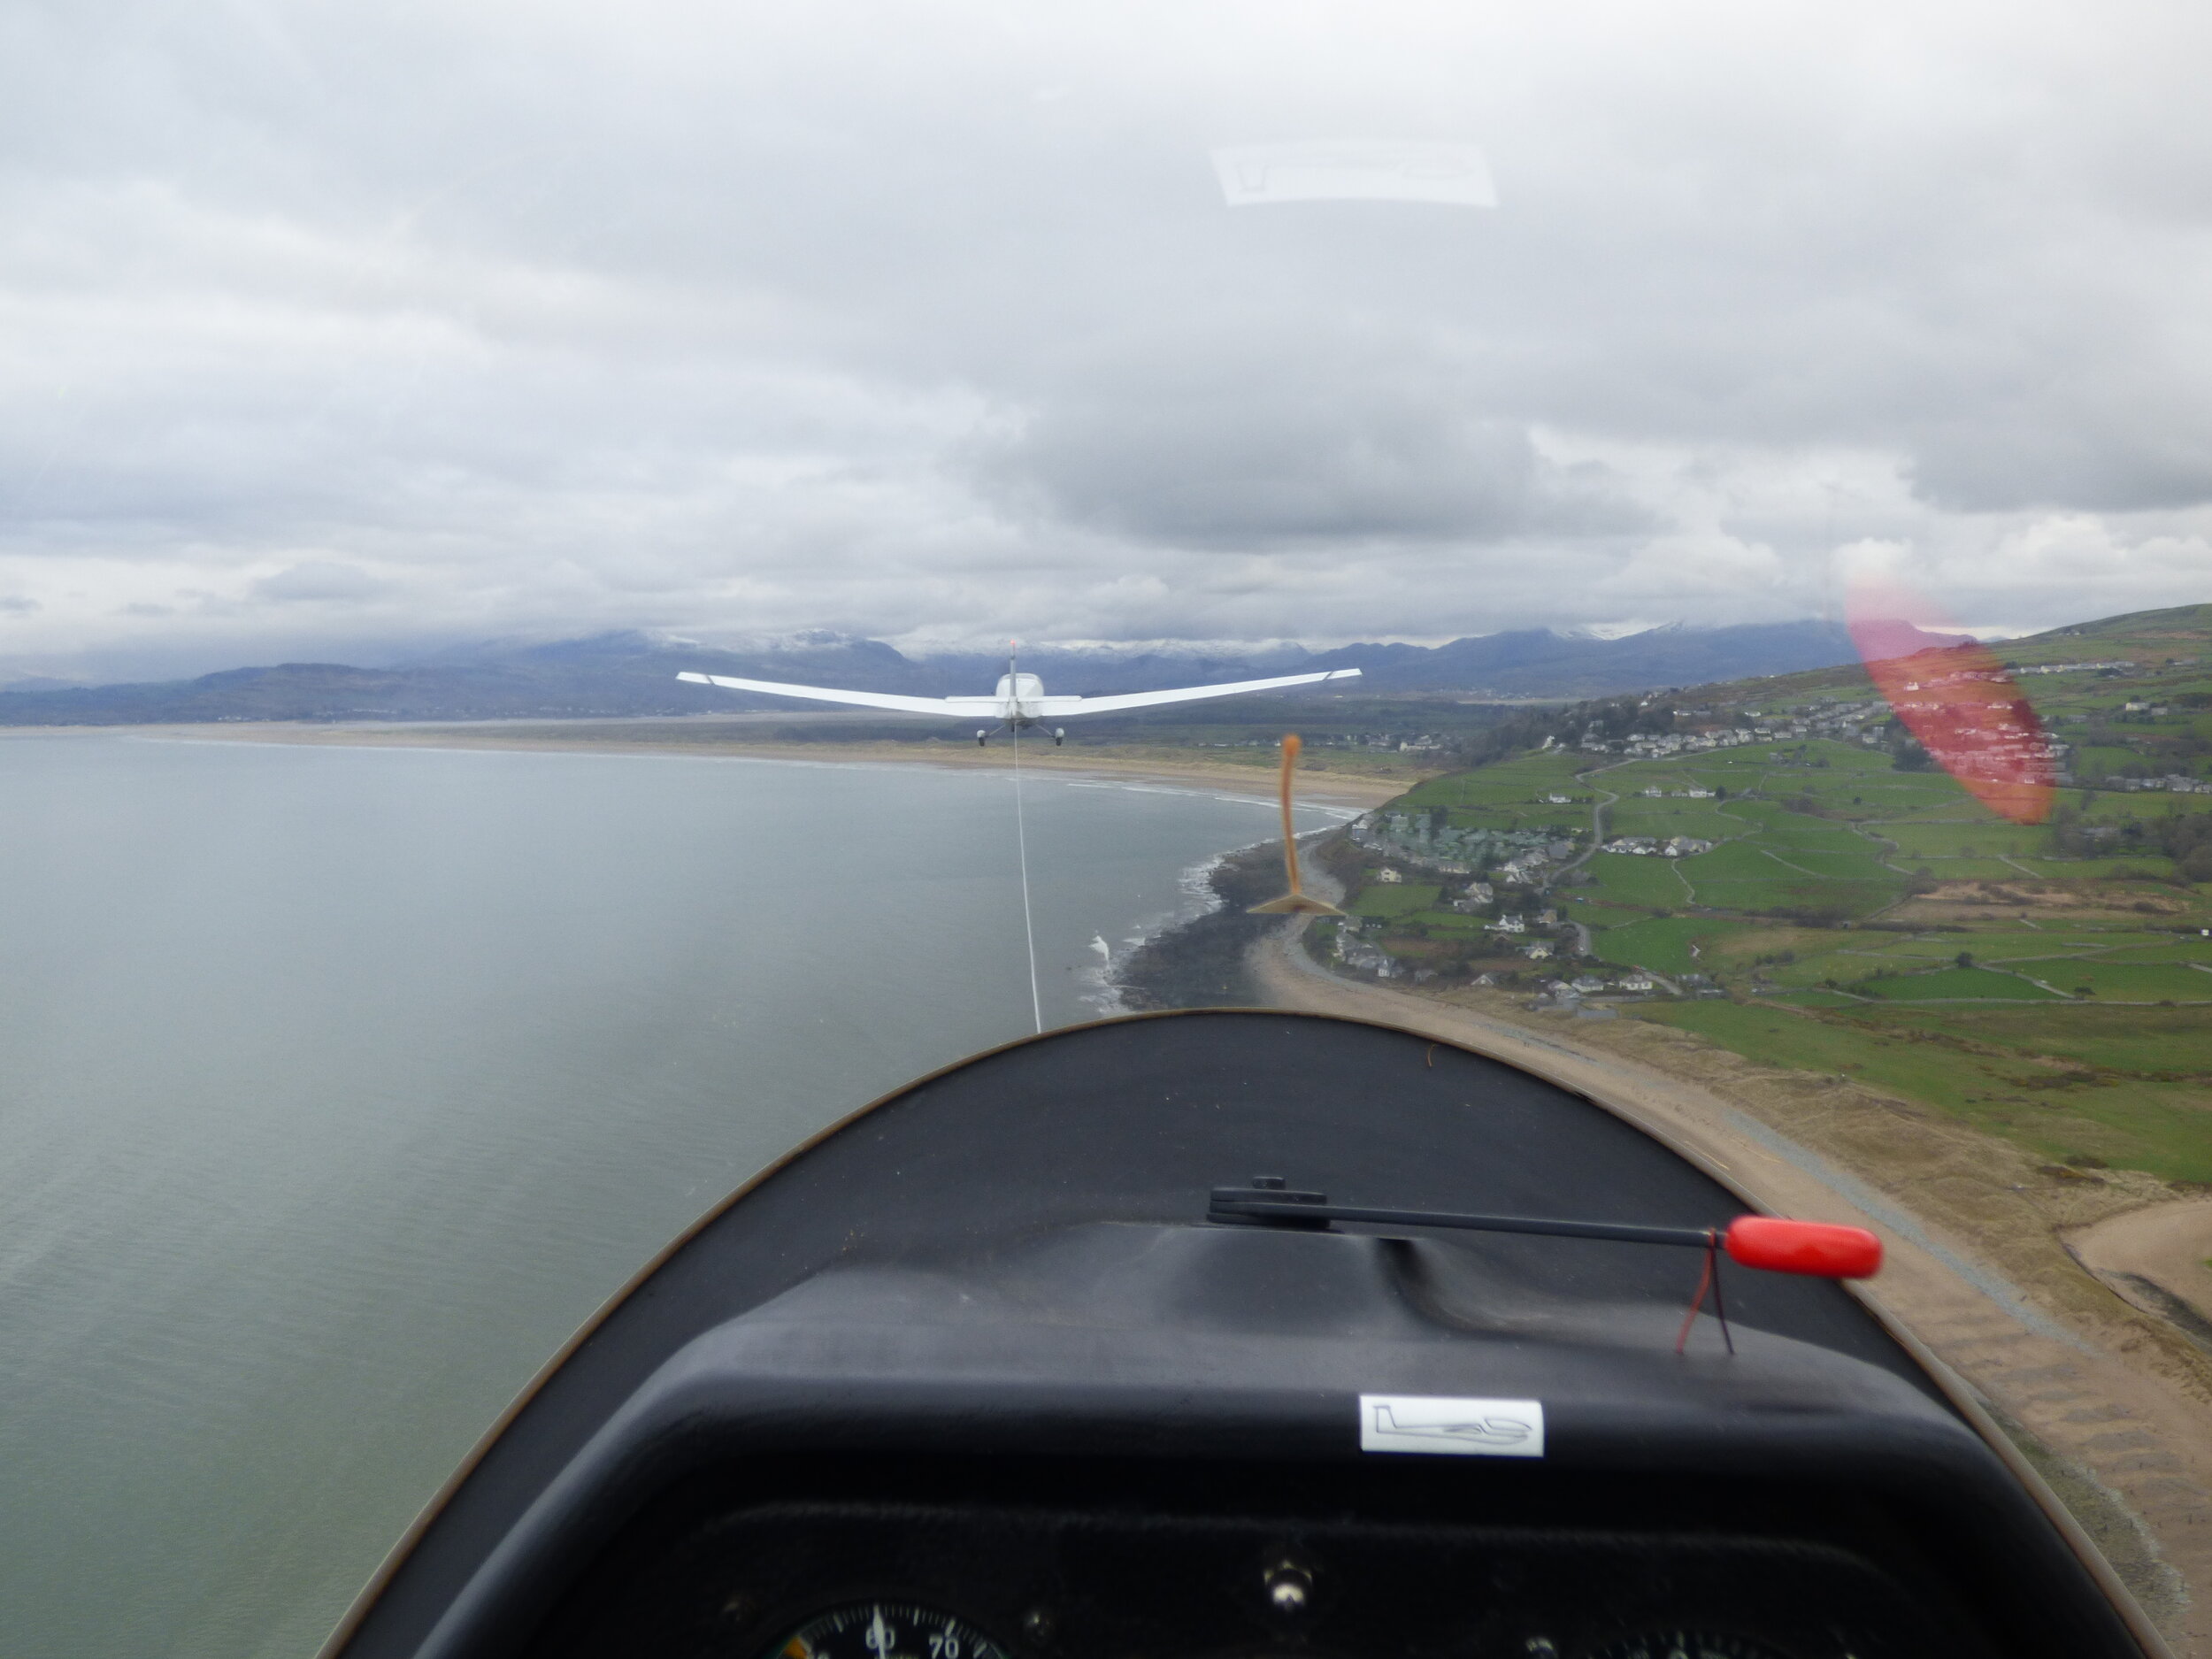 Aerotowing over the sea from Llanbedr